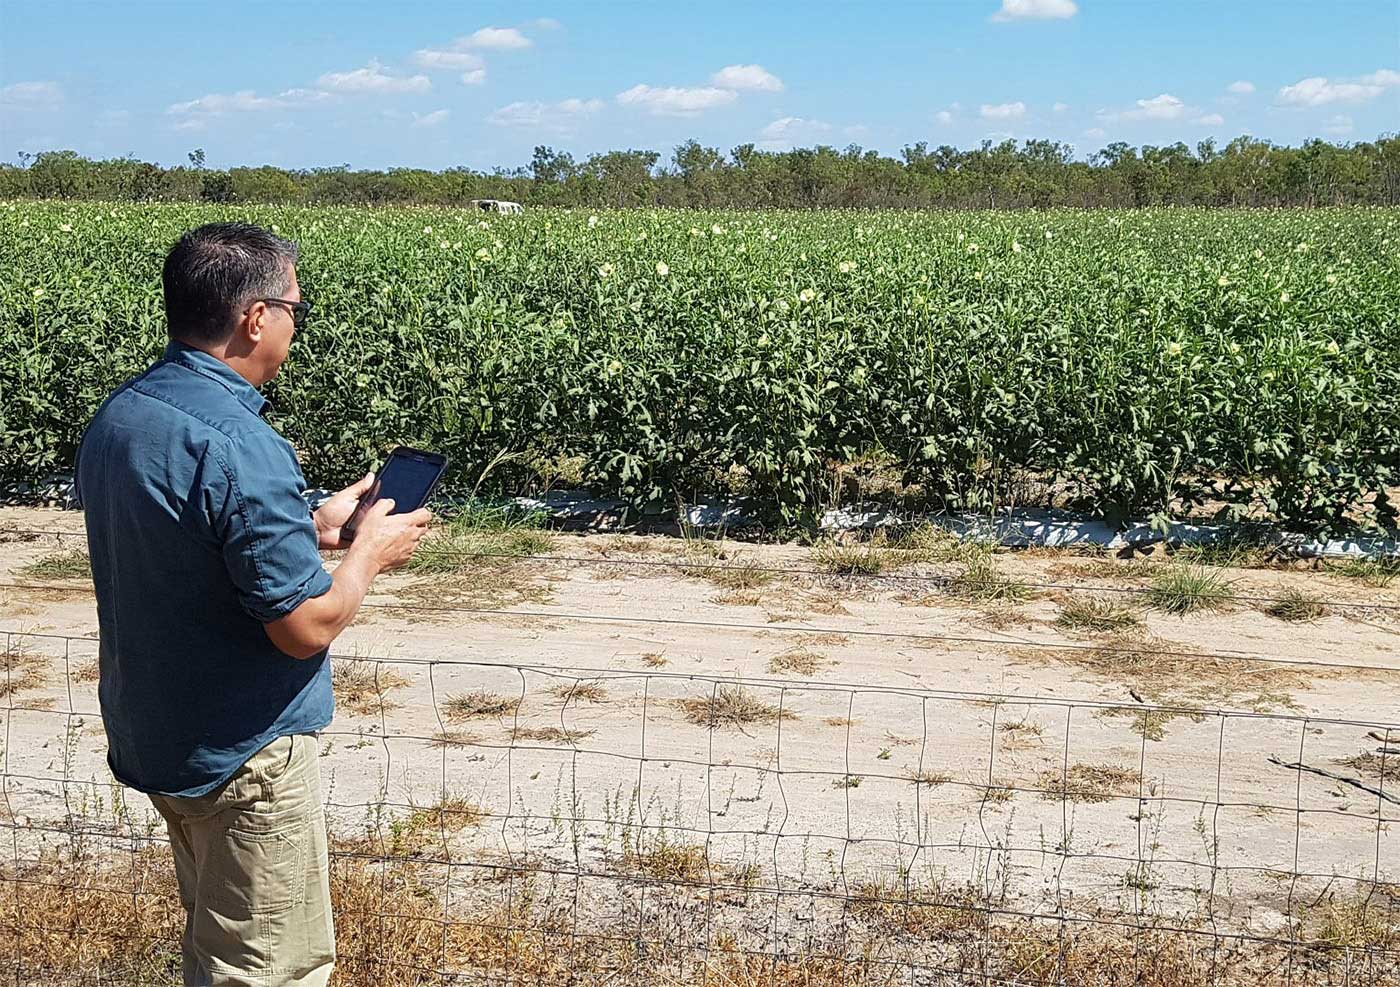 Man using a mobile device standing outside a crop